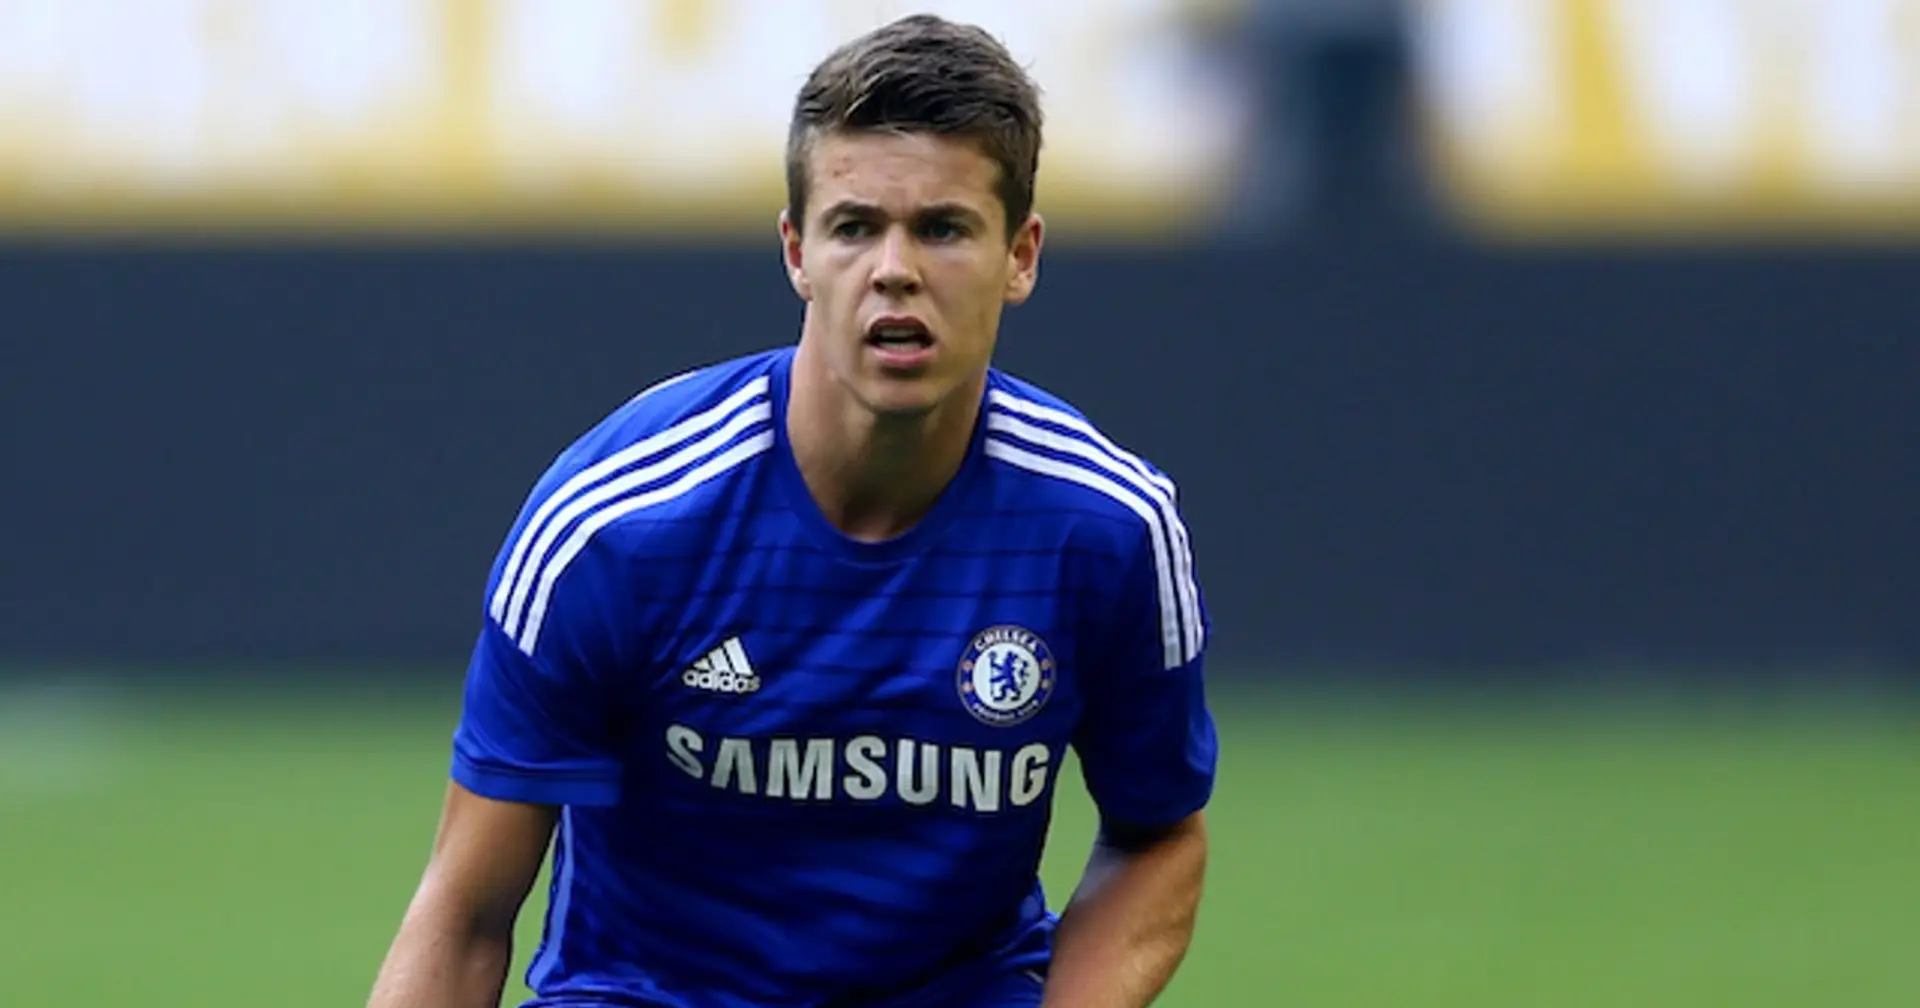 Why Chelsea offering Marco van Ginkel a new deal makes no sense whatsoever: explained in 6 sentences